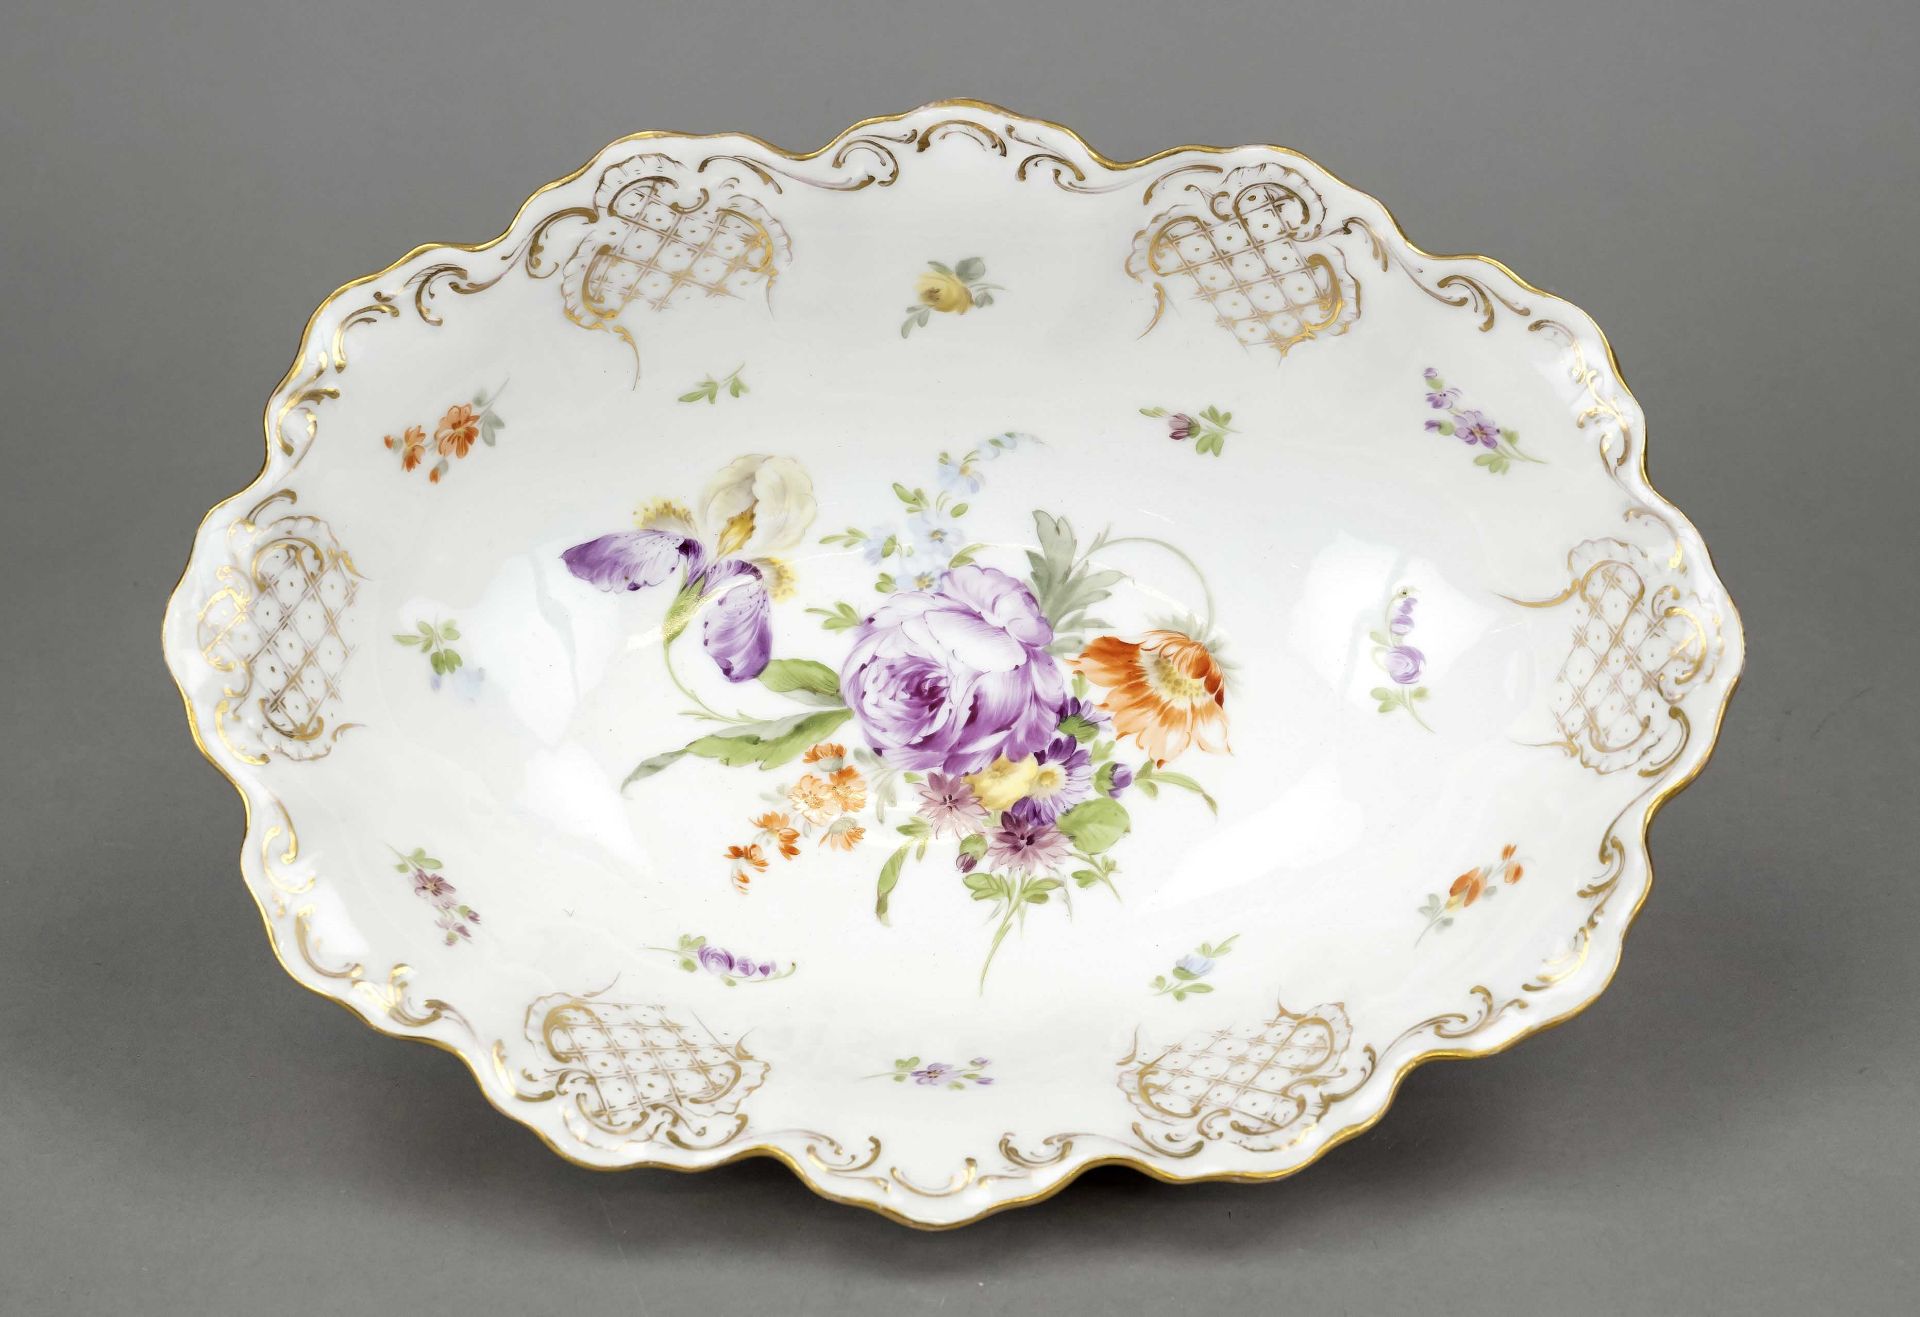 Oval decorative bowl, Richard Klemm, Dresden, Marek 1888-1918, polychrome flower painting with - Image 2 of 2